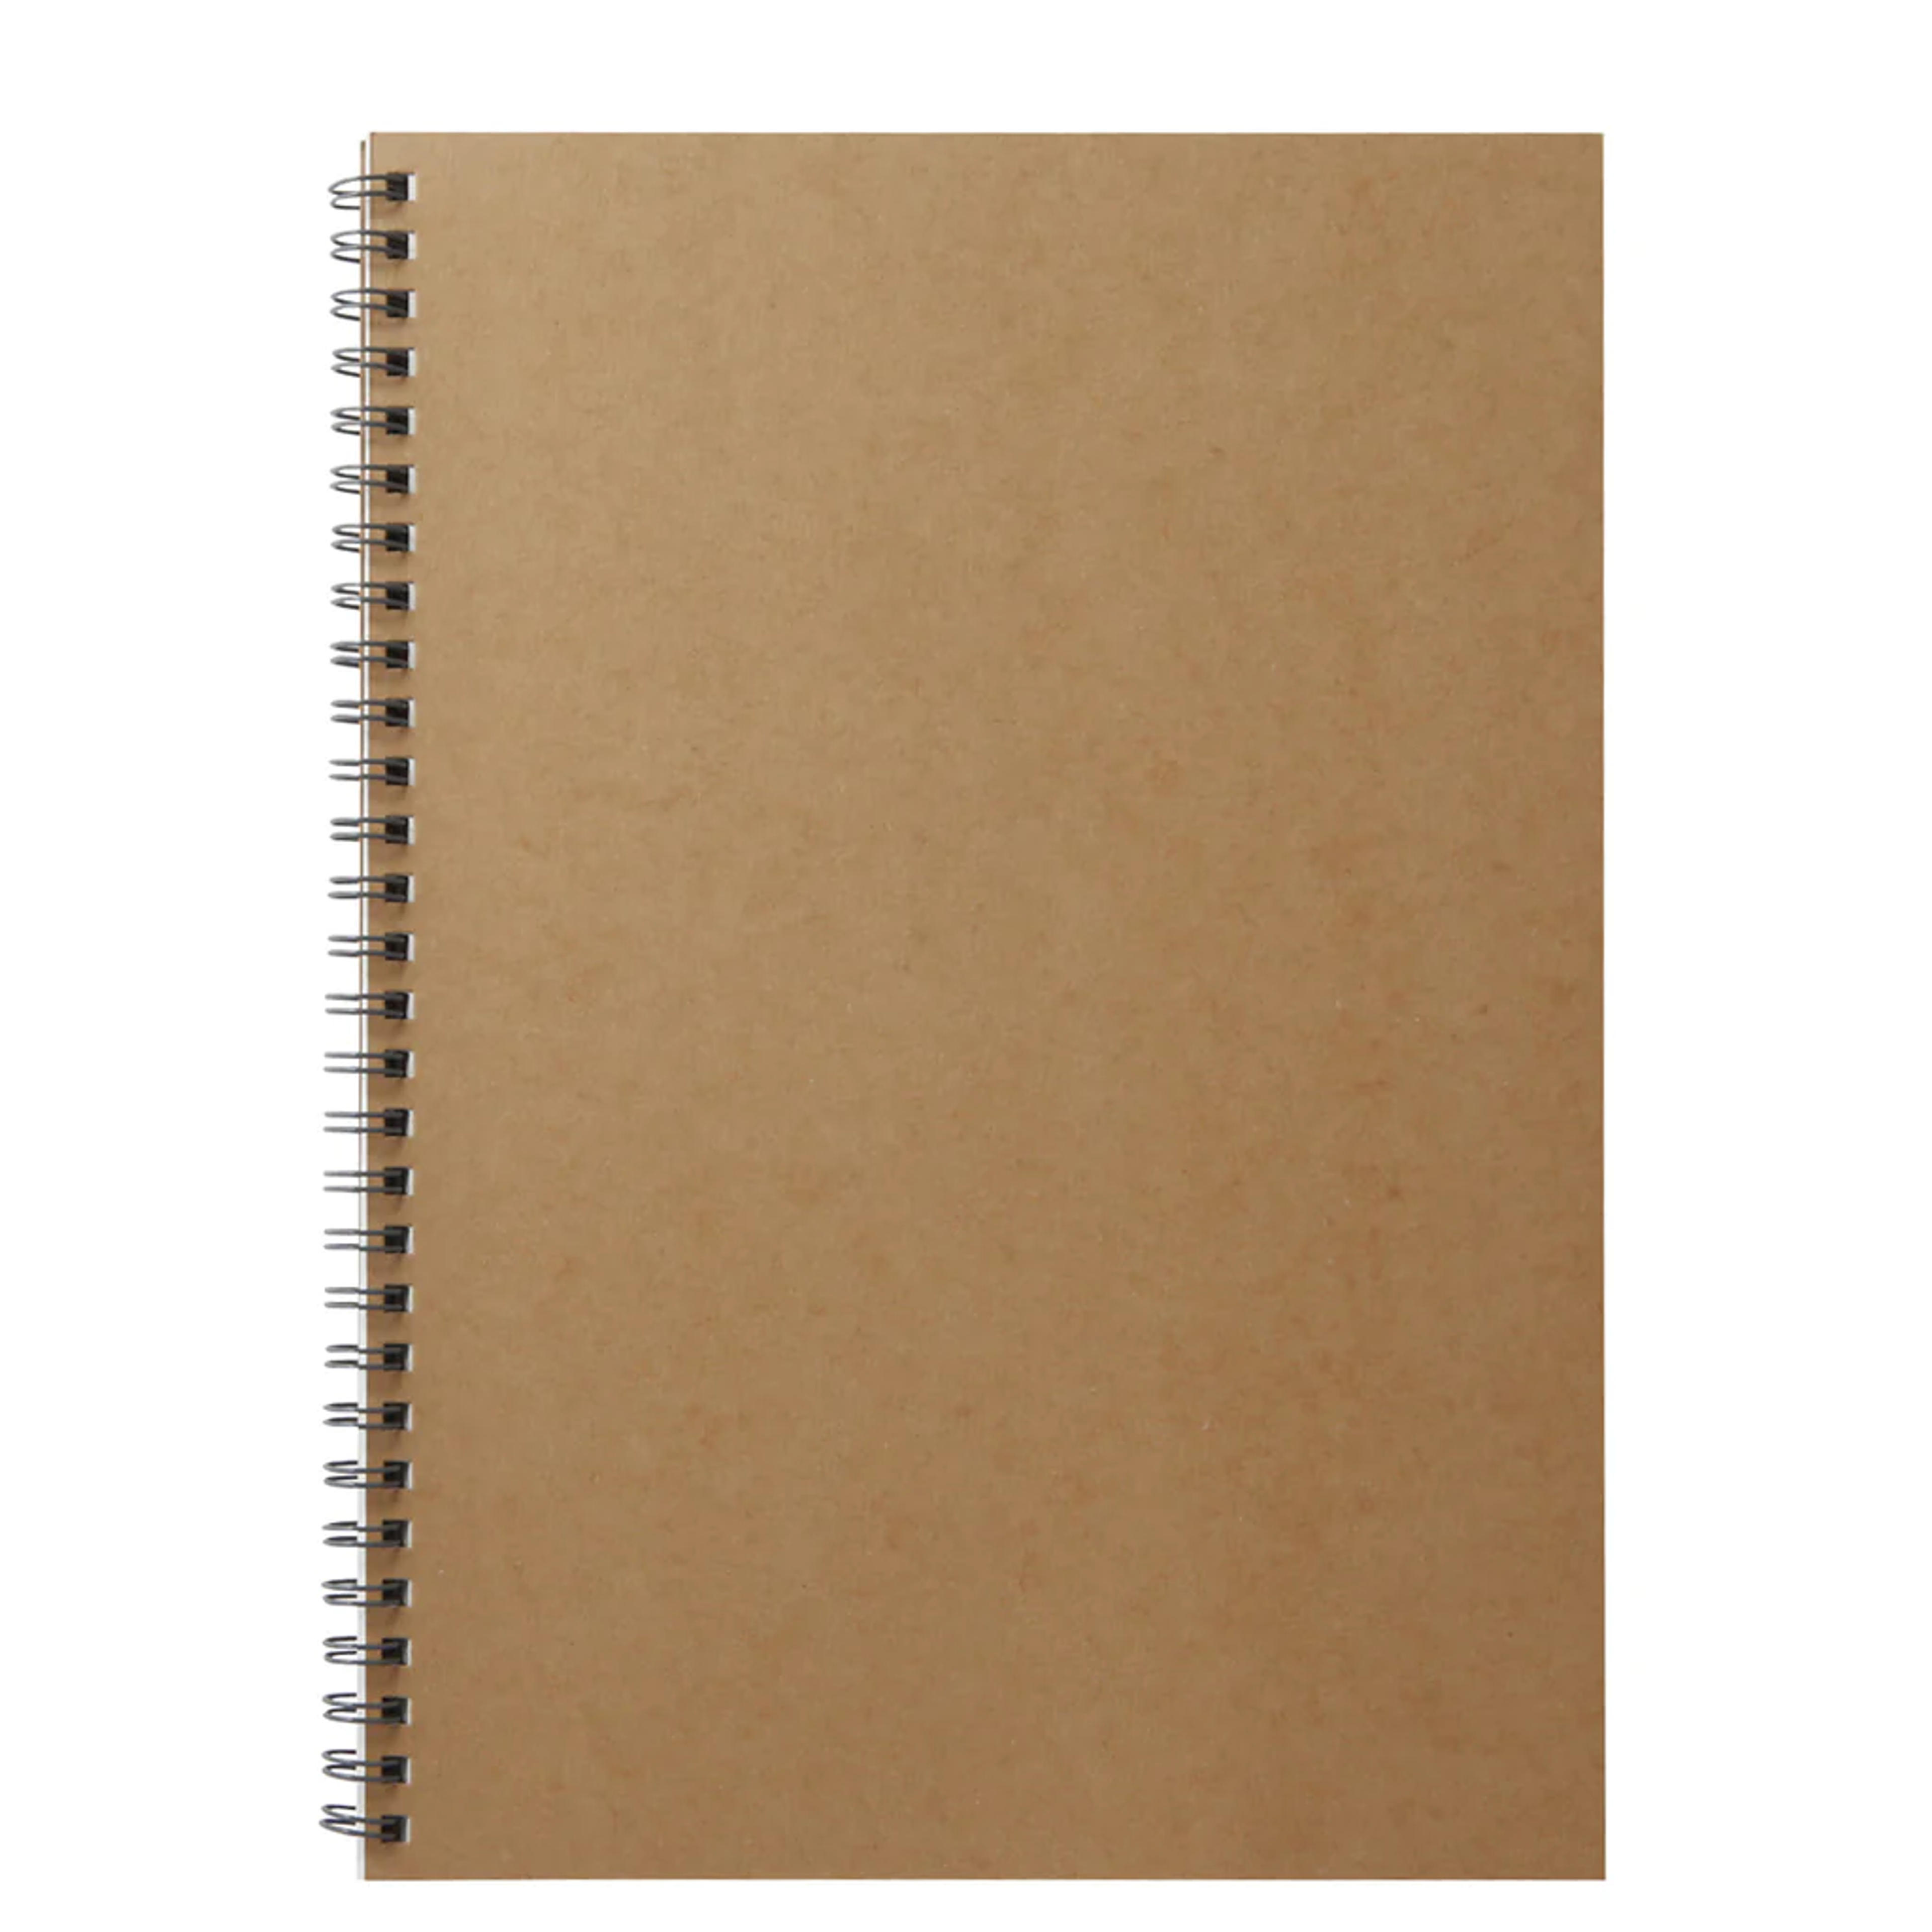 Planting Tree Paper Double Ringed Ruled Notebook